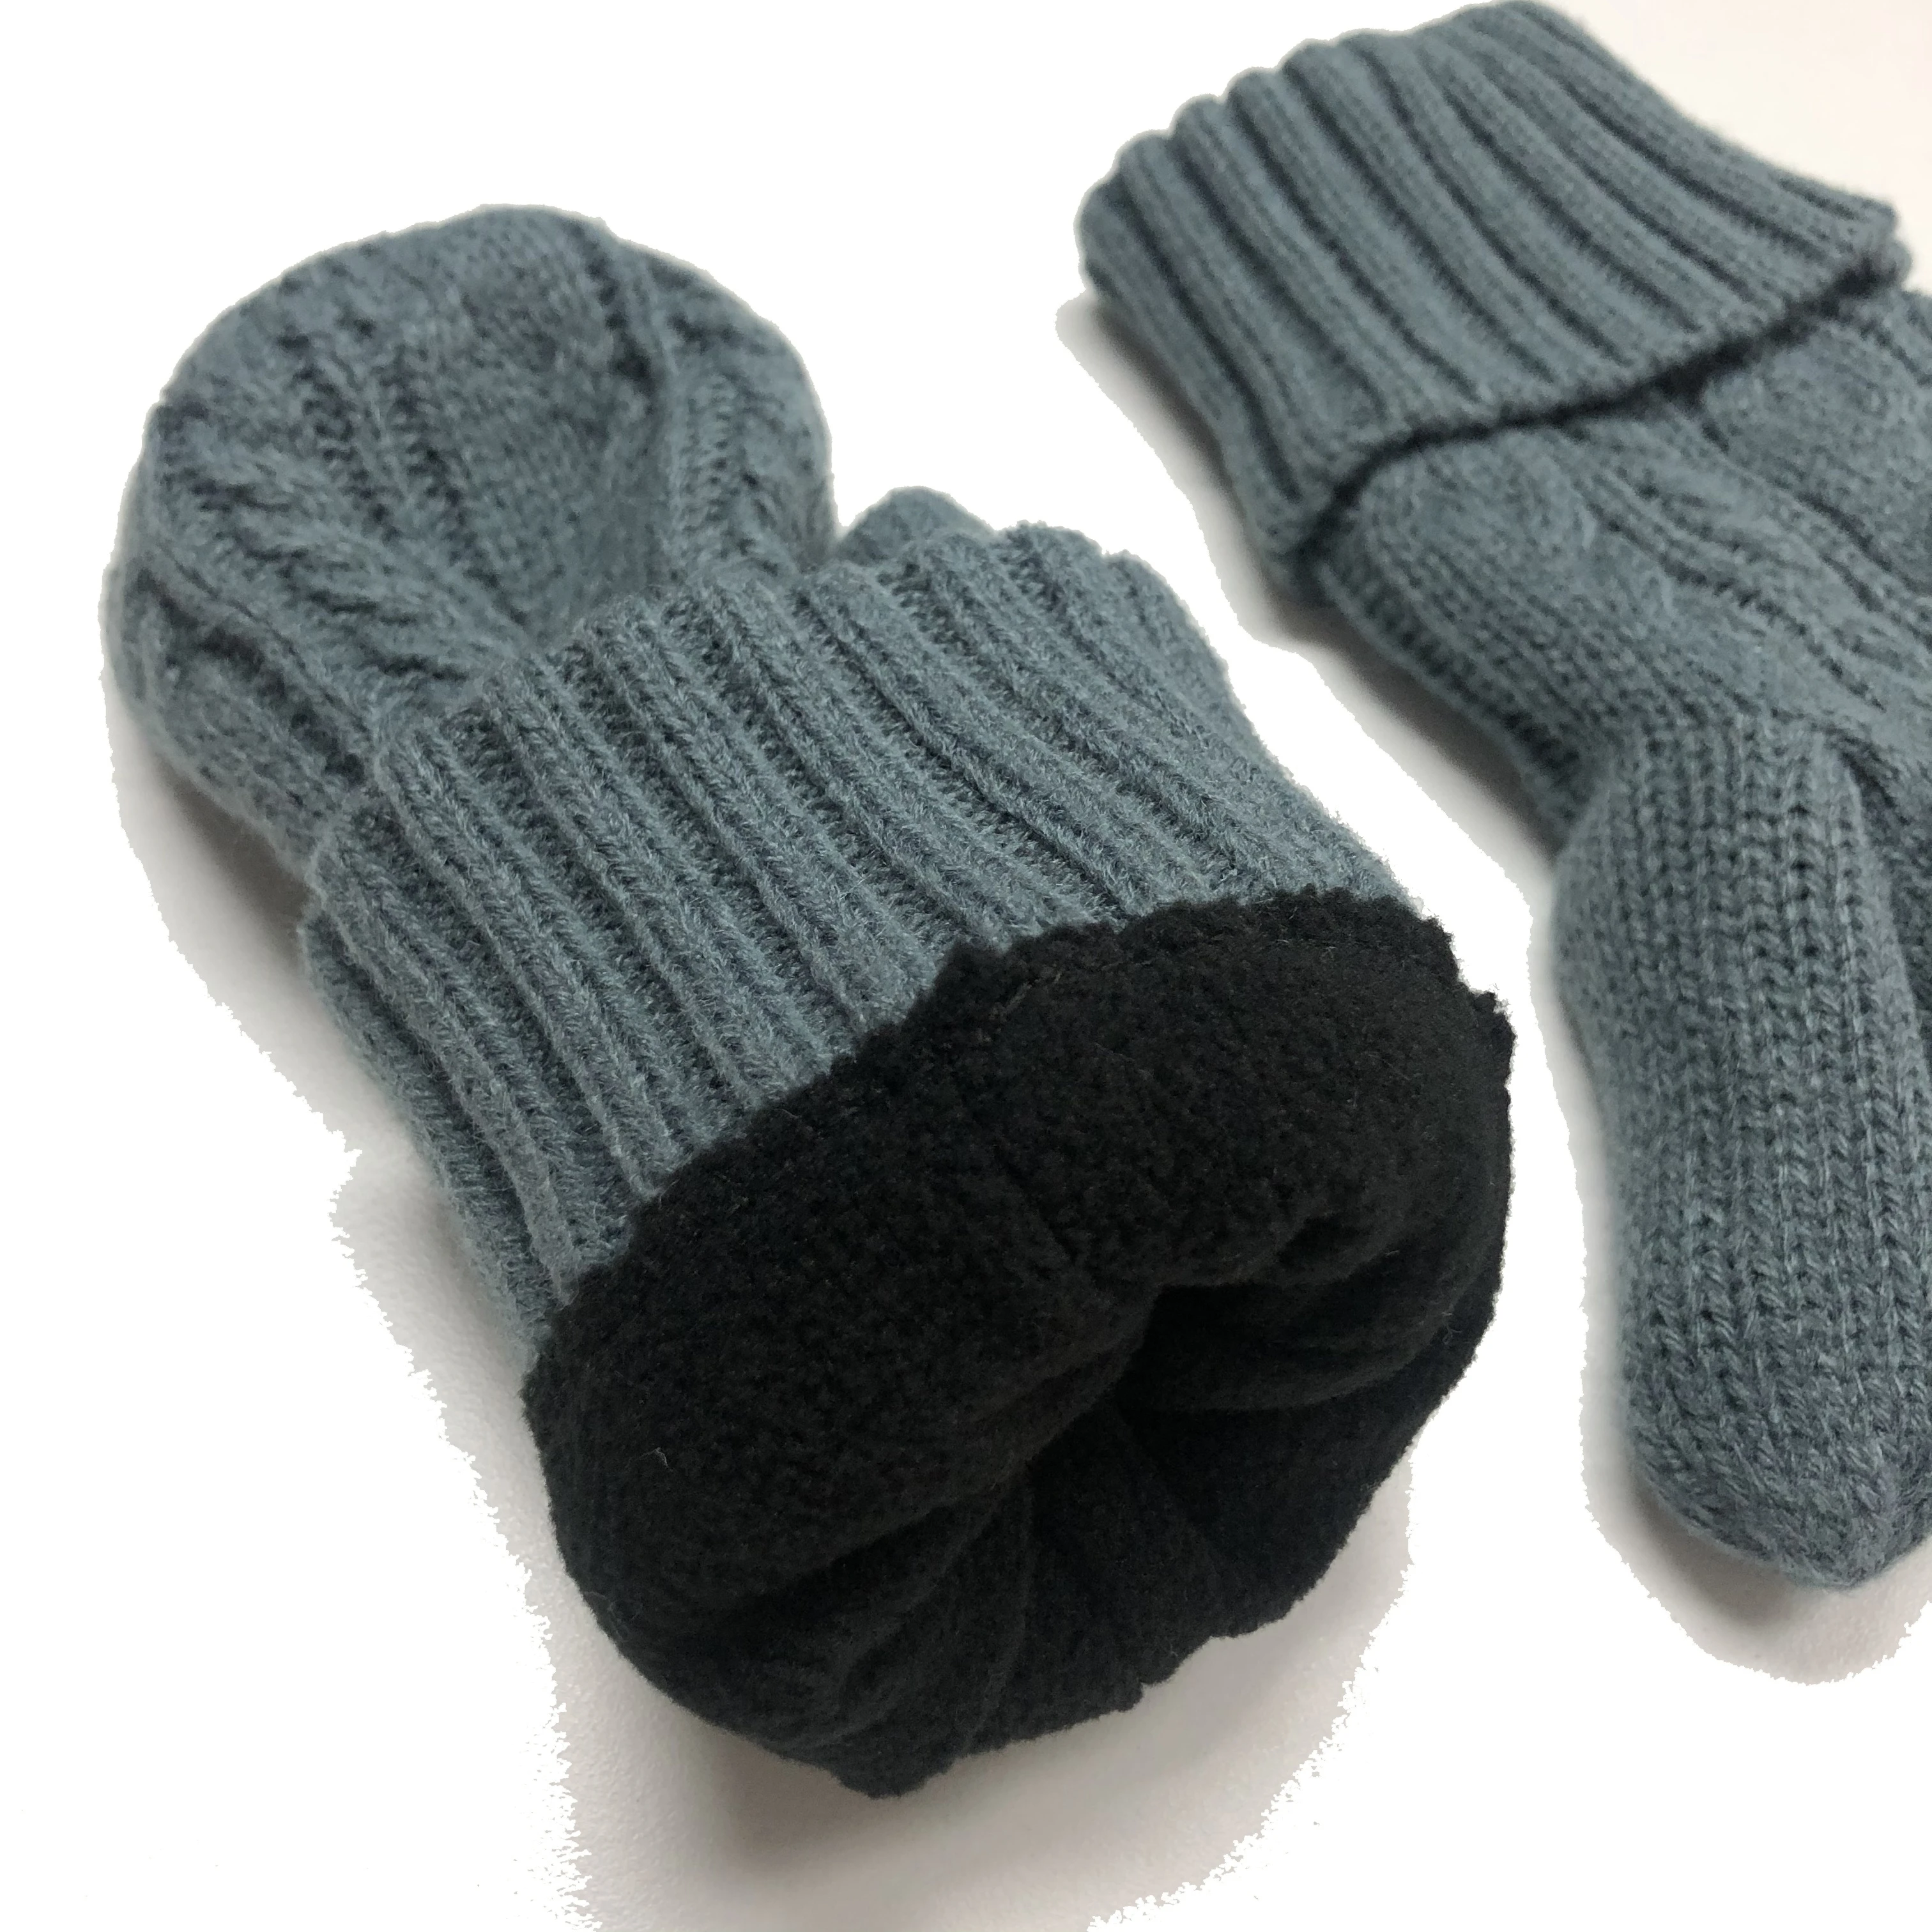 Reflective Silk Knit Cable winter mitten